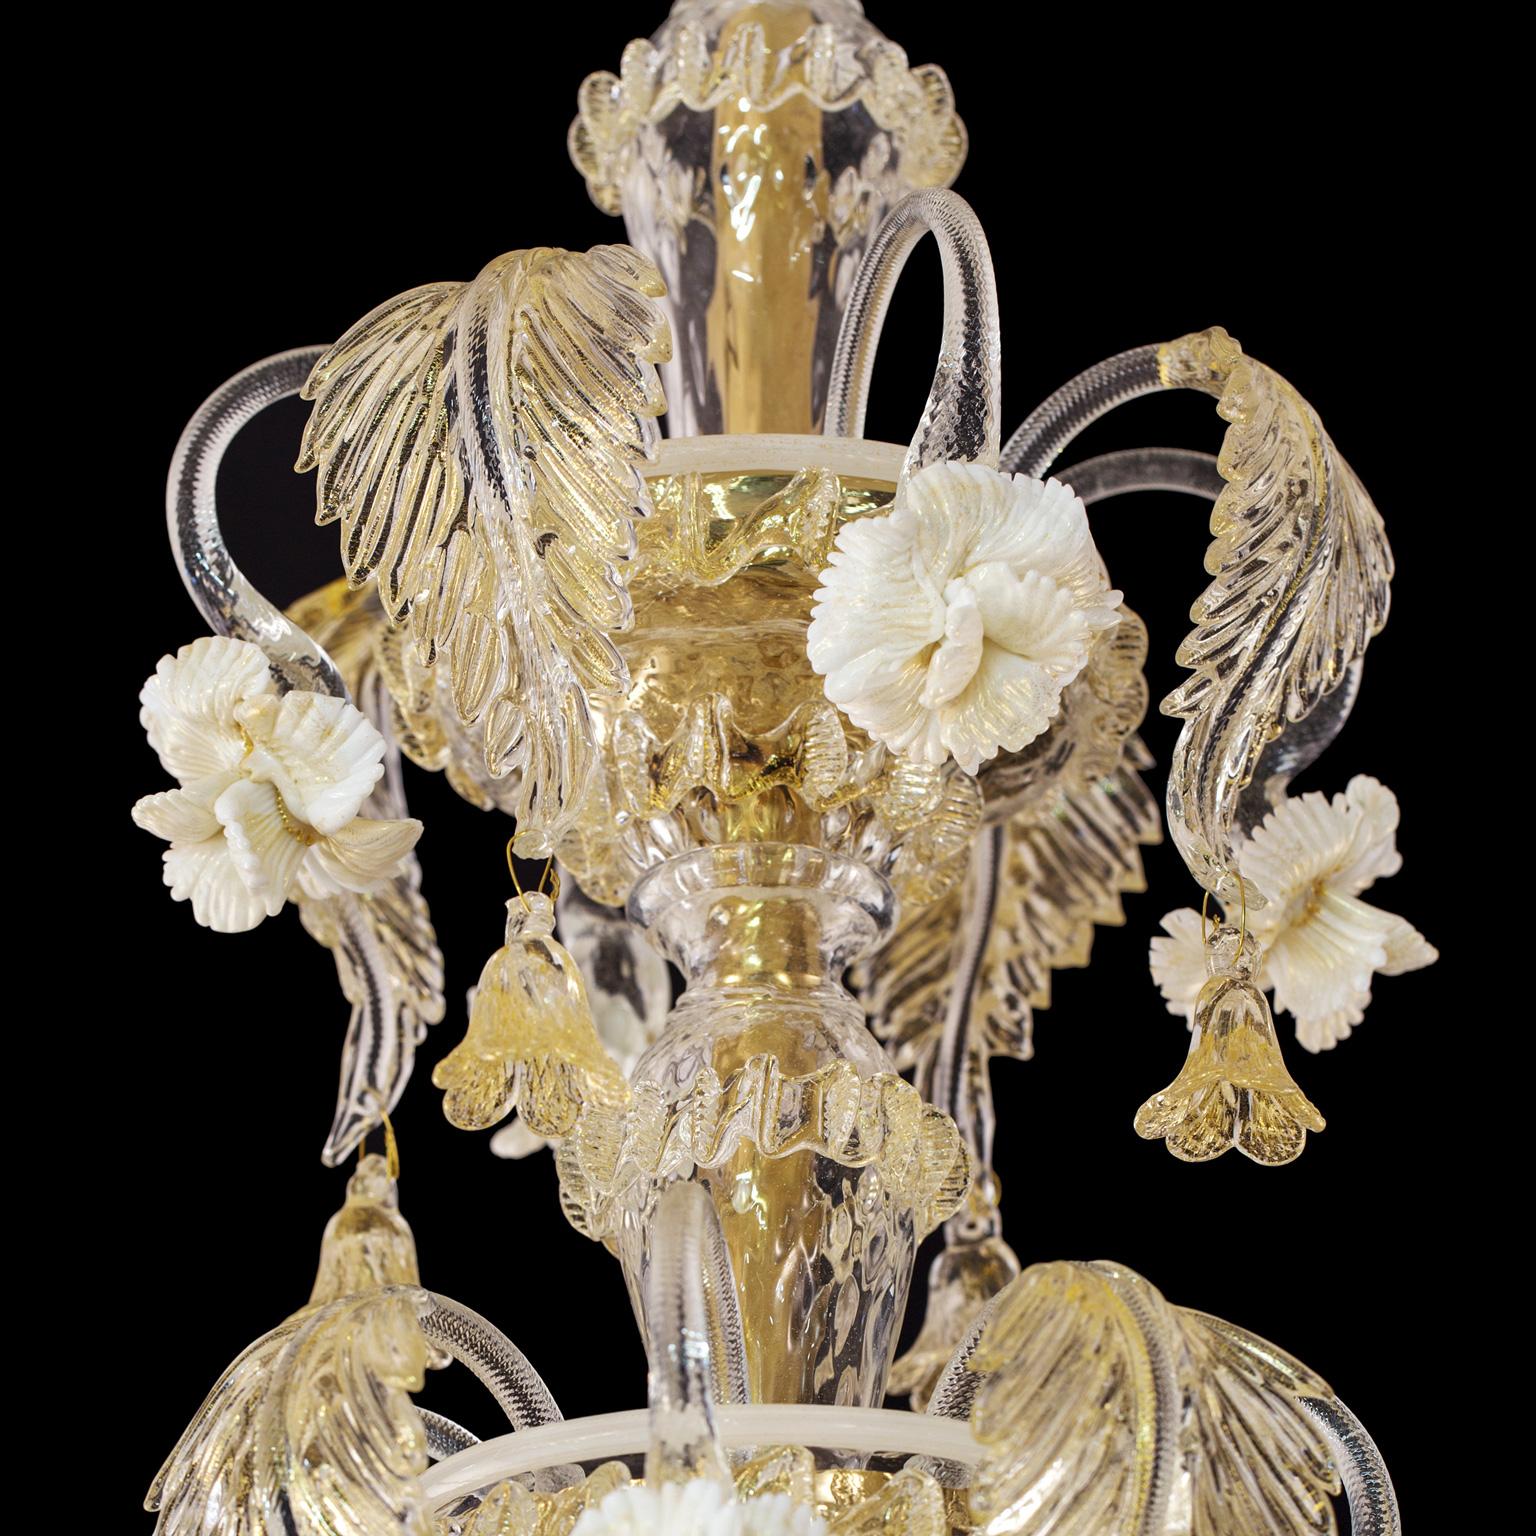 Contemporary Artistic Chandelier 16+8+8 arms Crystal Murano Glass gold details by Multiforme For Sale